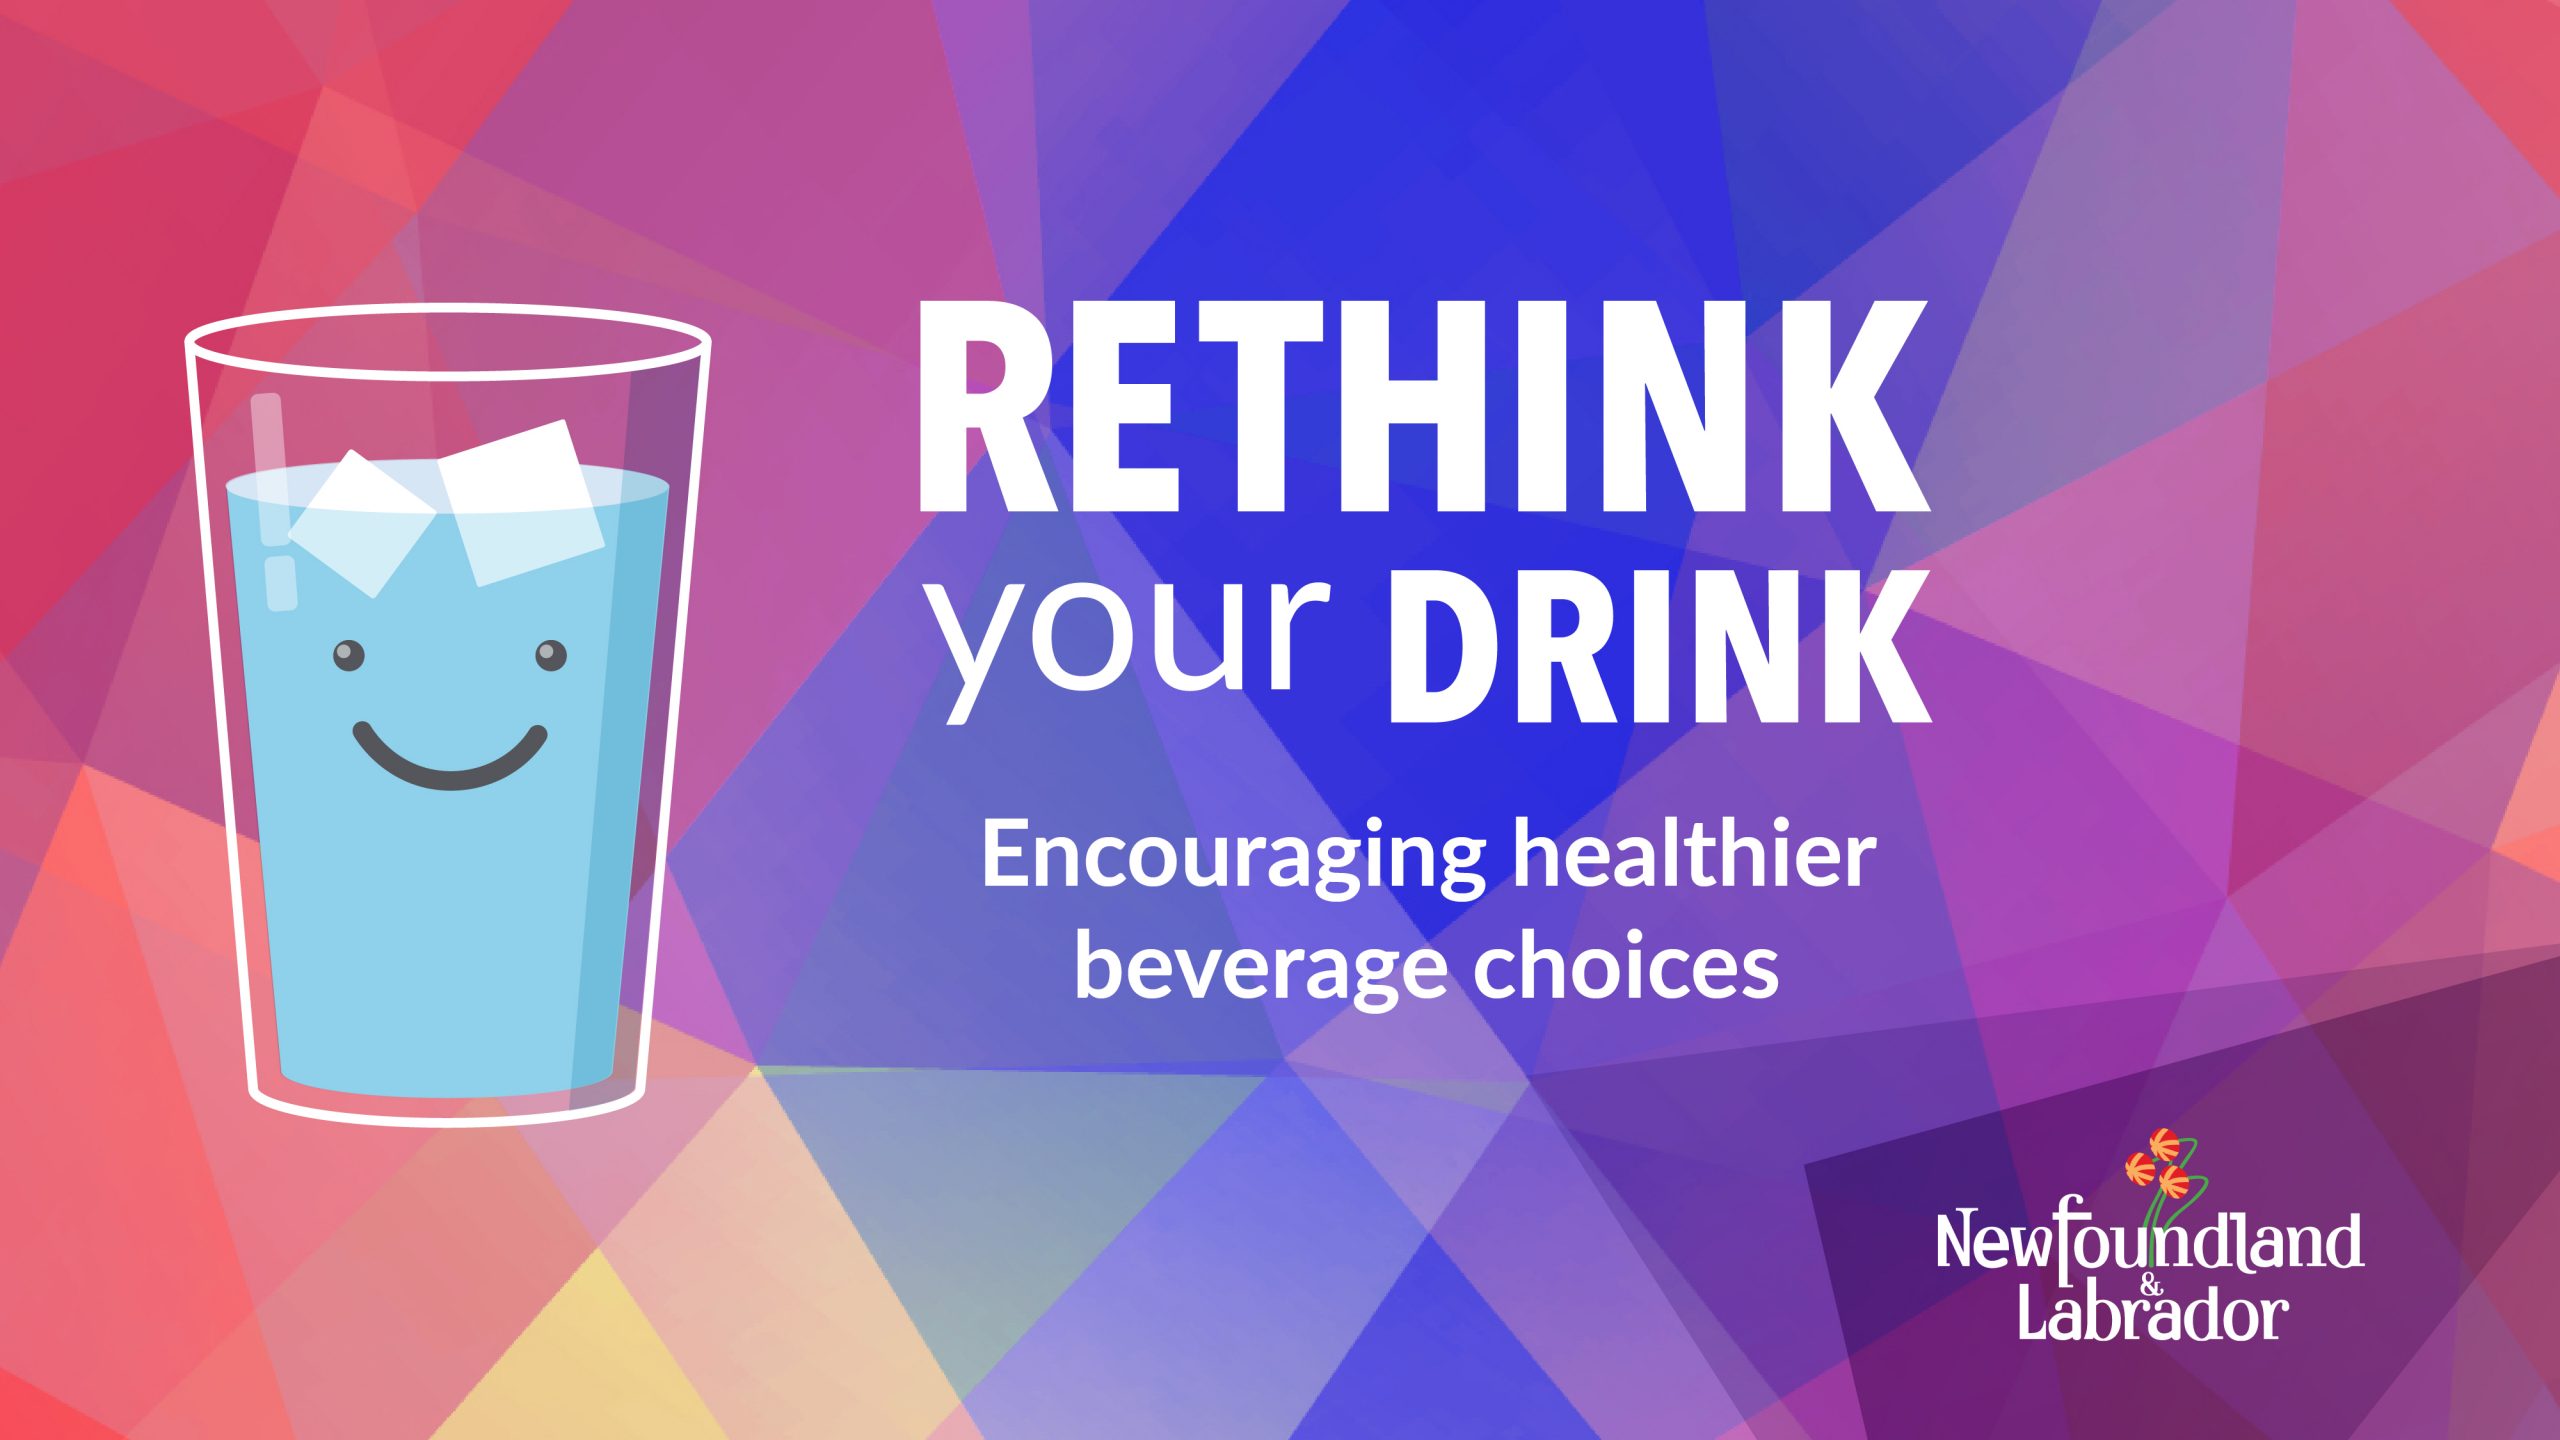 Provincial Govt Encourages Citizens to ‘Reconsider Your Drink’